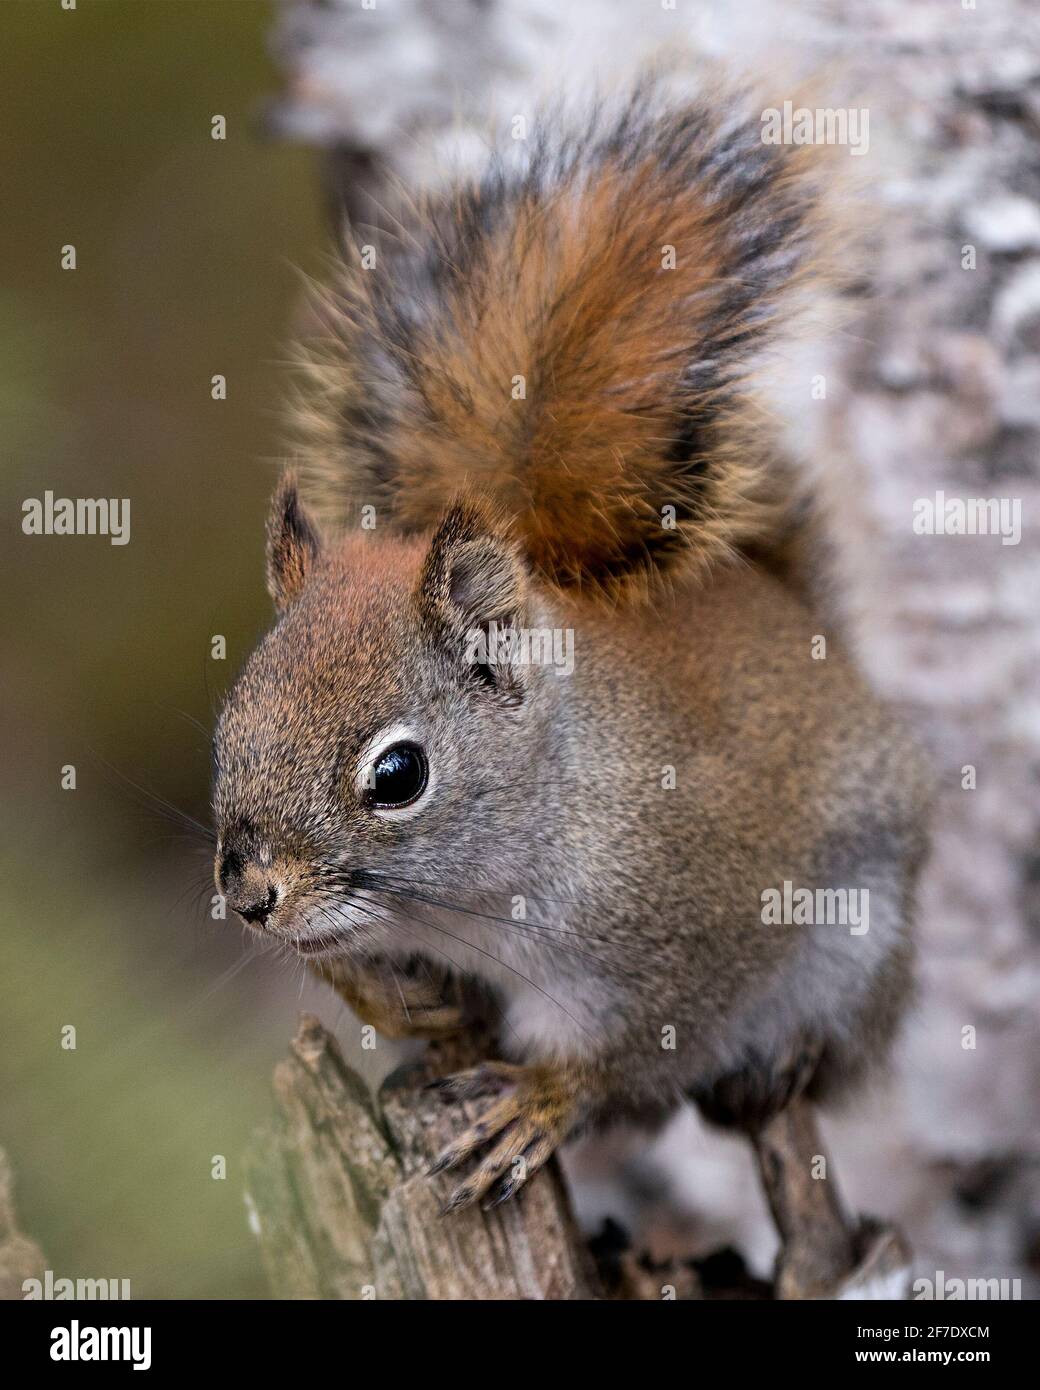 Squirrel head close-up front view sitting on a tree stump with a blur background in its environment and habitat displaying bushy tail, brown fur. Stock Photo